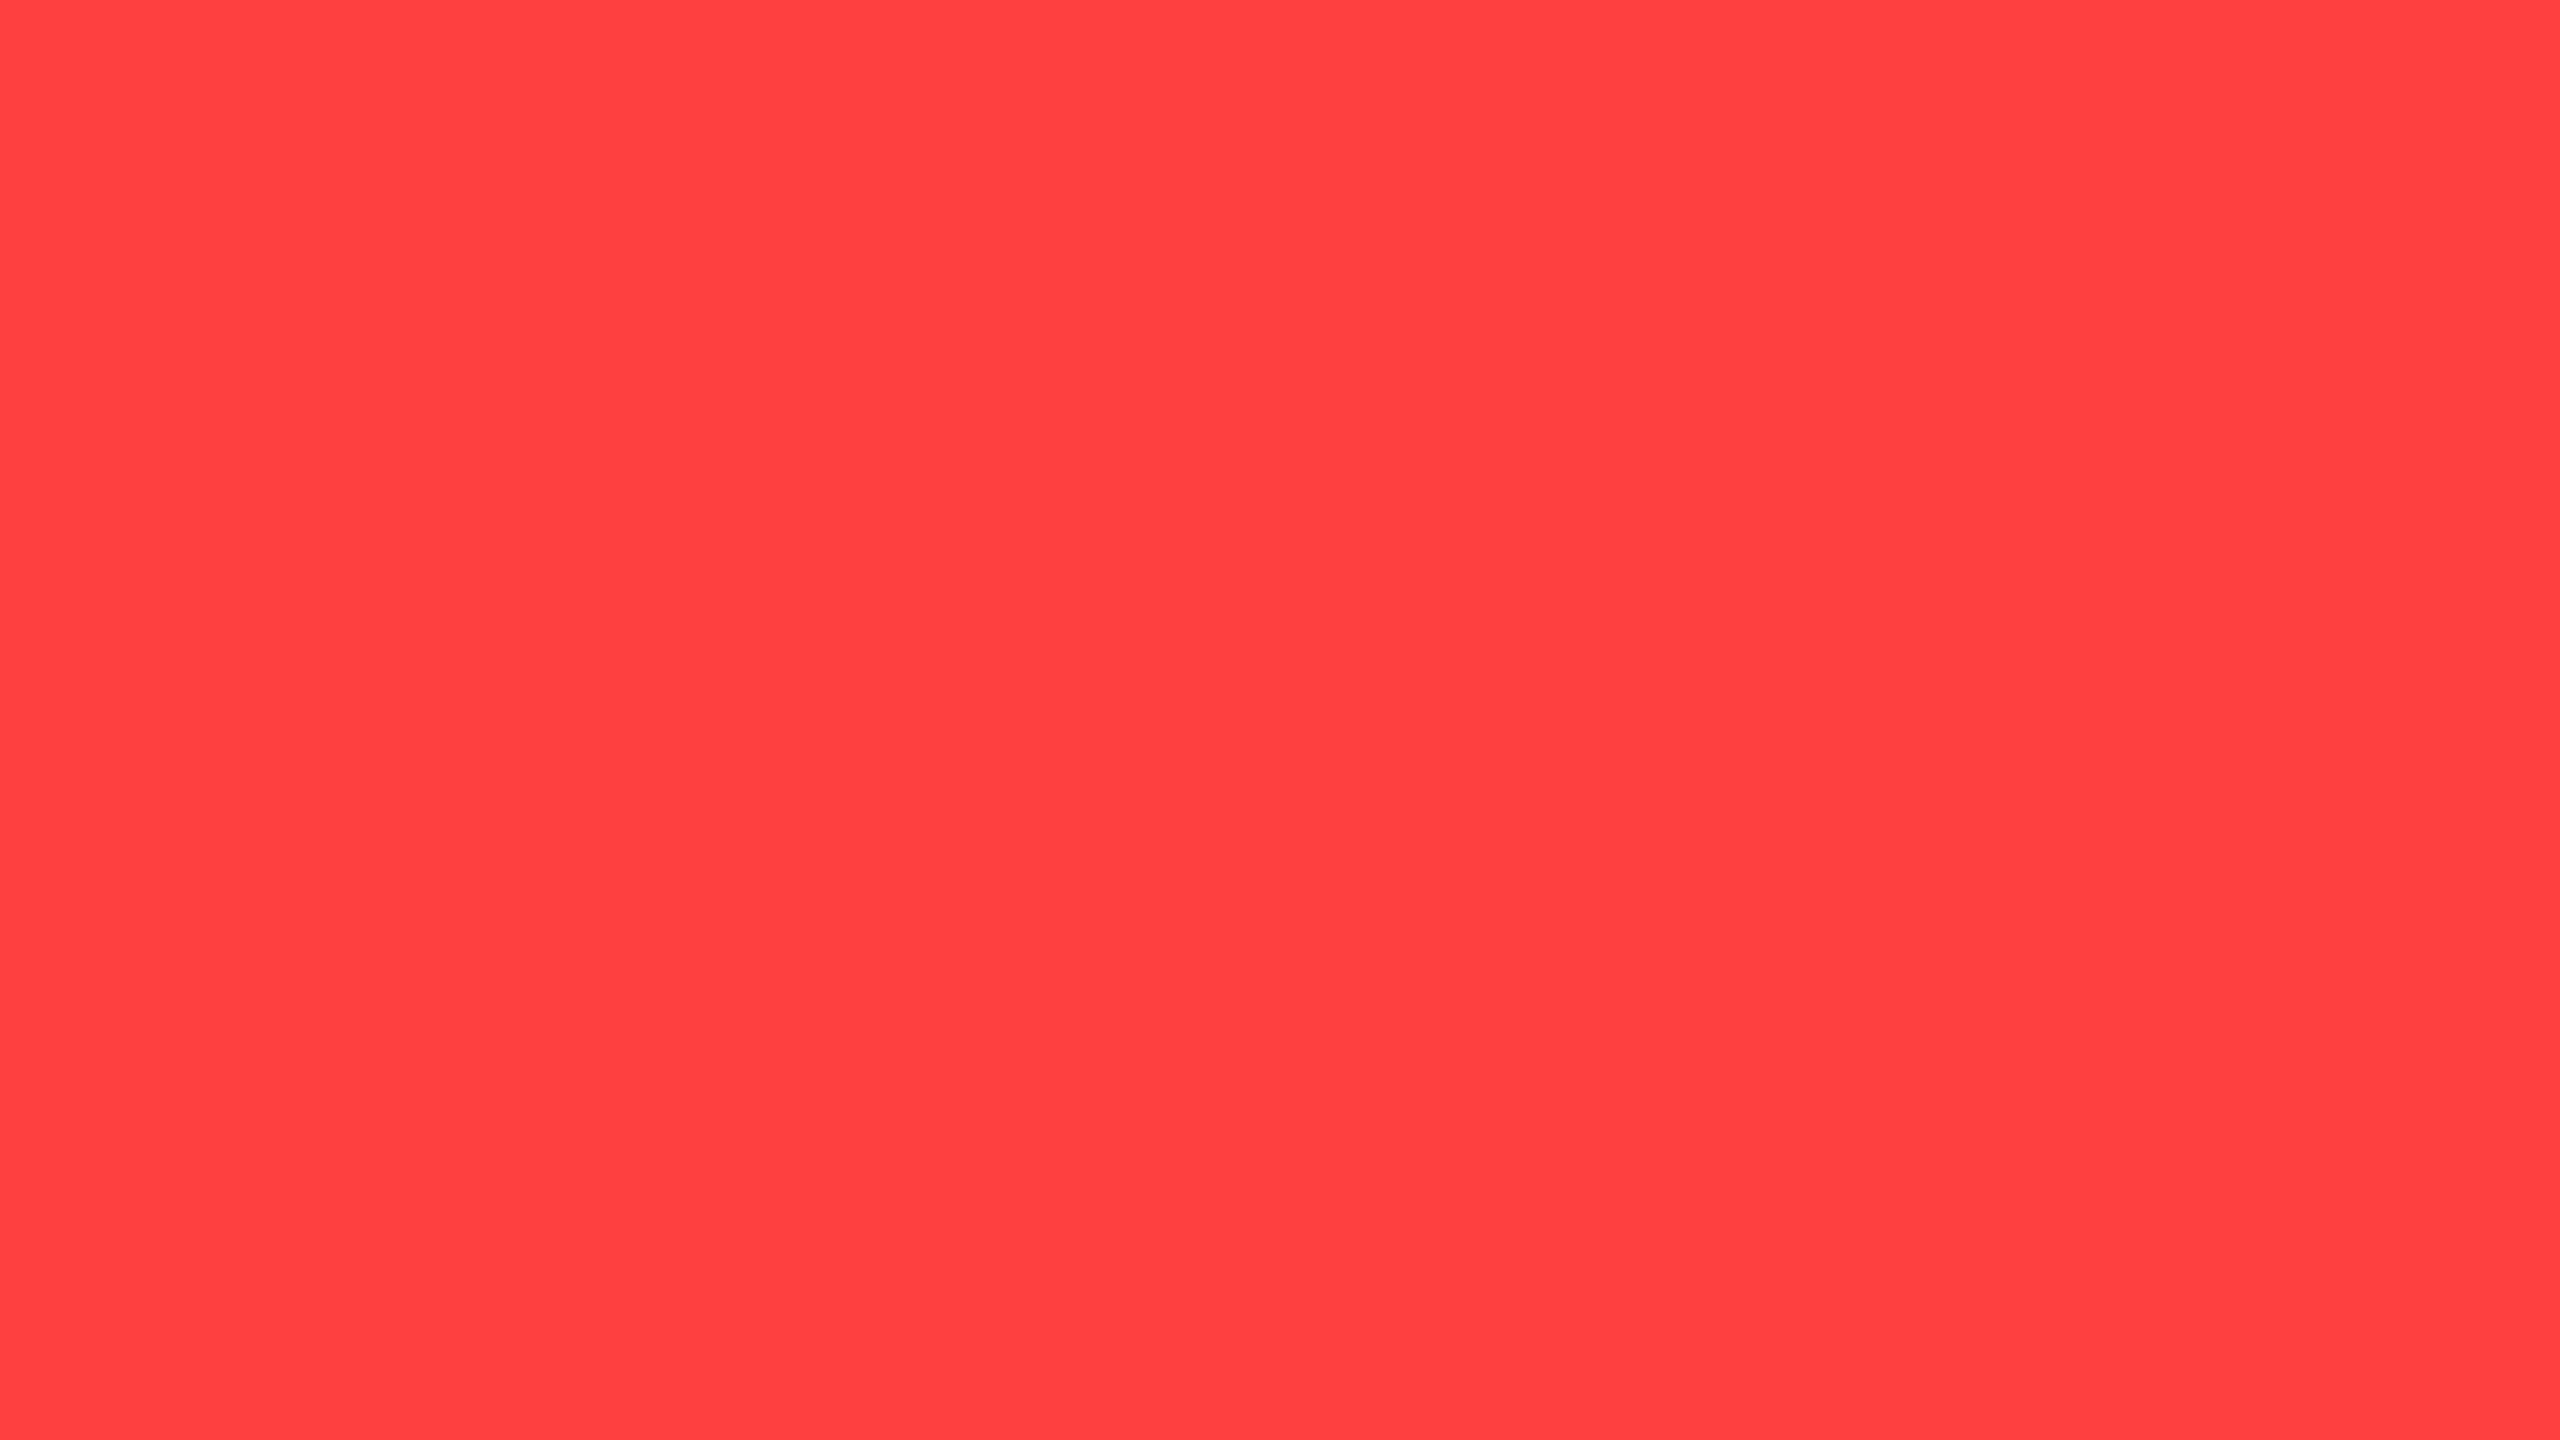 Free resolution Coral Red solid color background, view and .